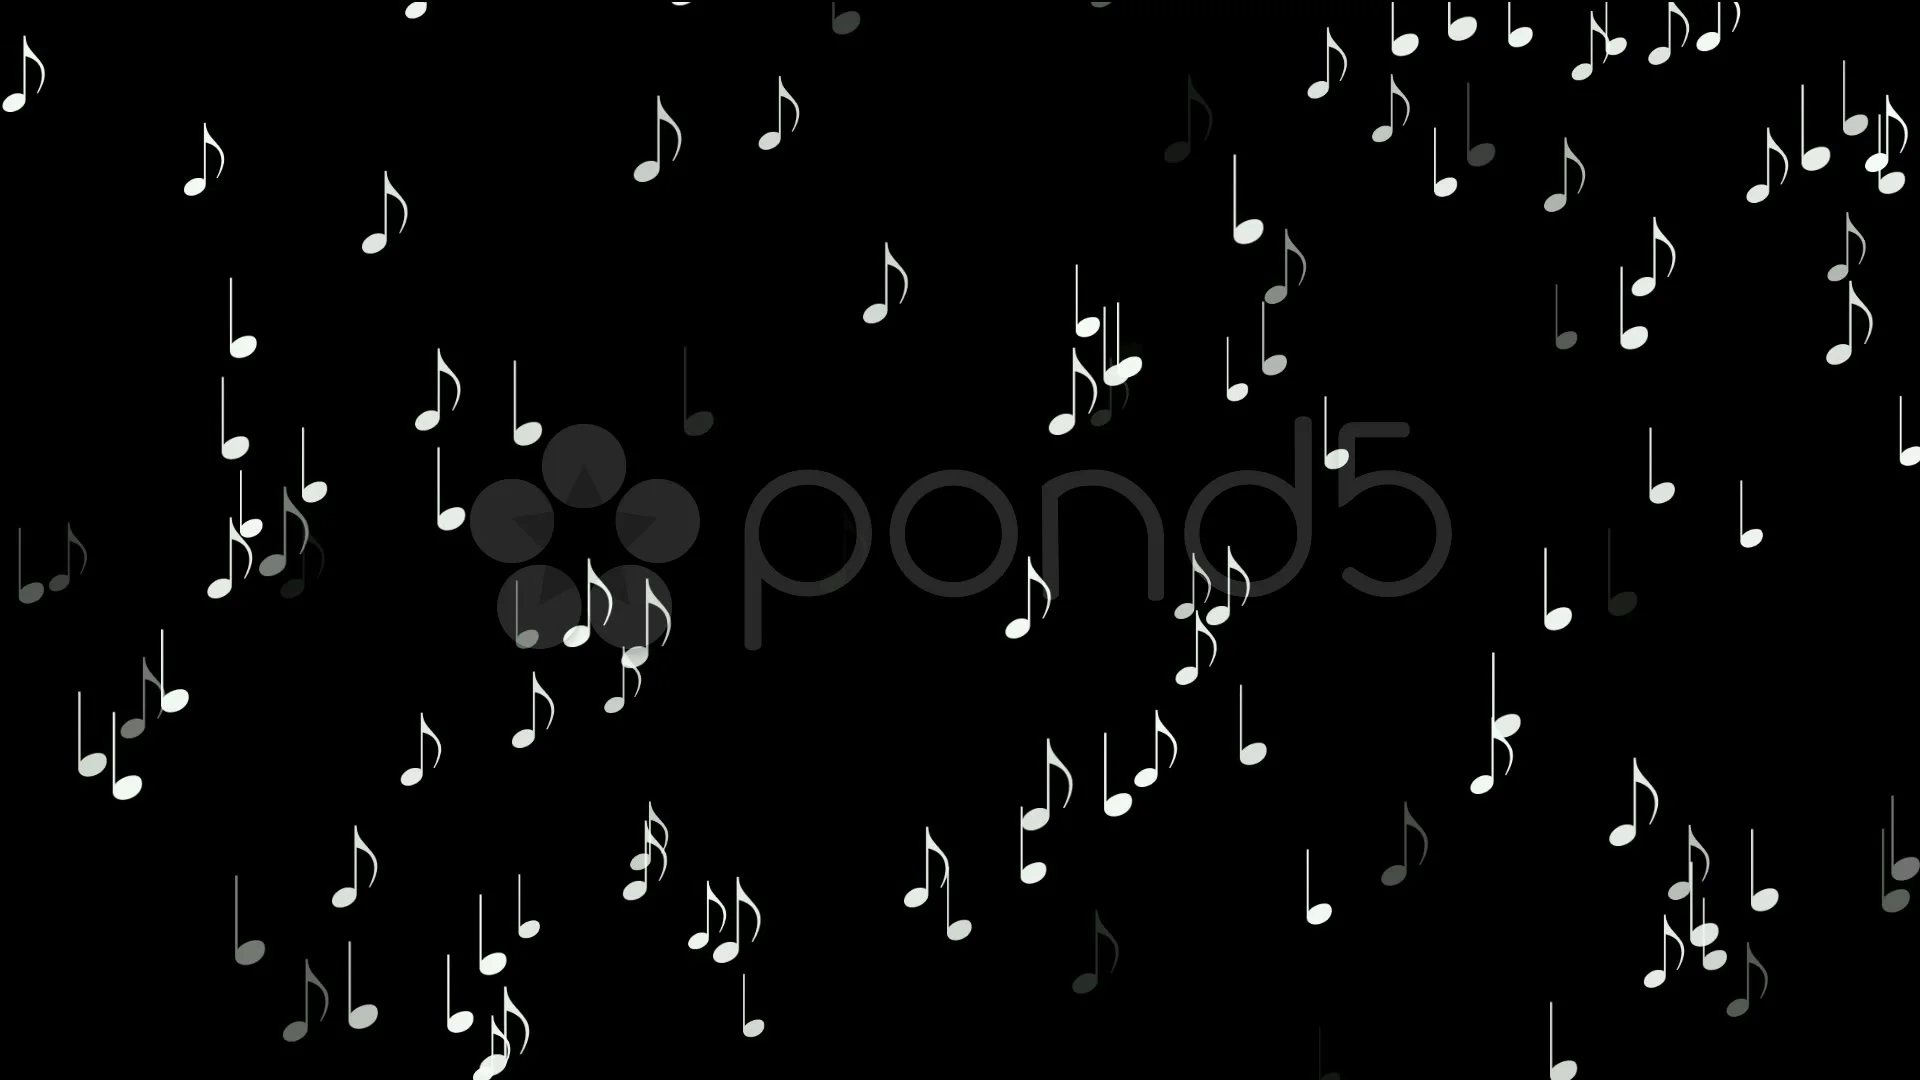 AWESOME AND BEAUTIFUL MUSIC NOTE SYMBOL!!! I LOVE IT SO MUCH!!! I LOVE THIS  WALLPAPER SOOOOOOOOOOOOOOOO MUCH!!! | Music art, Music notes, Music  wallpaper